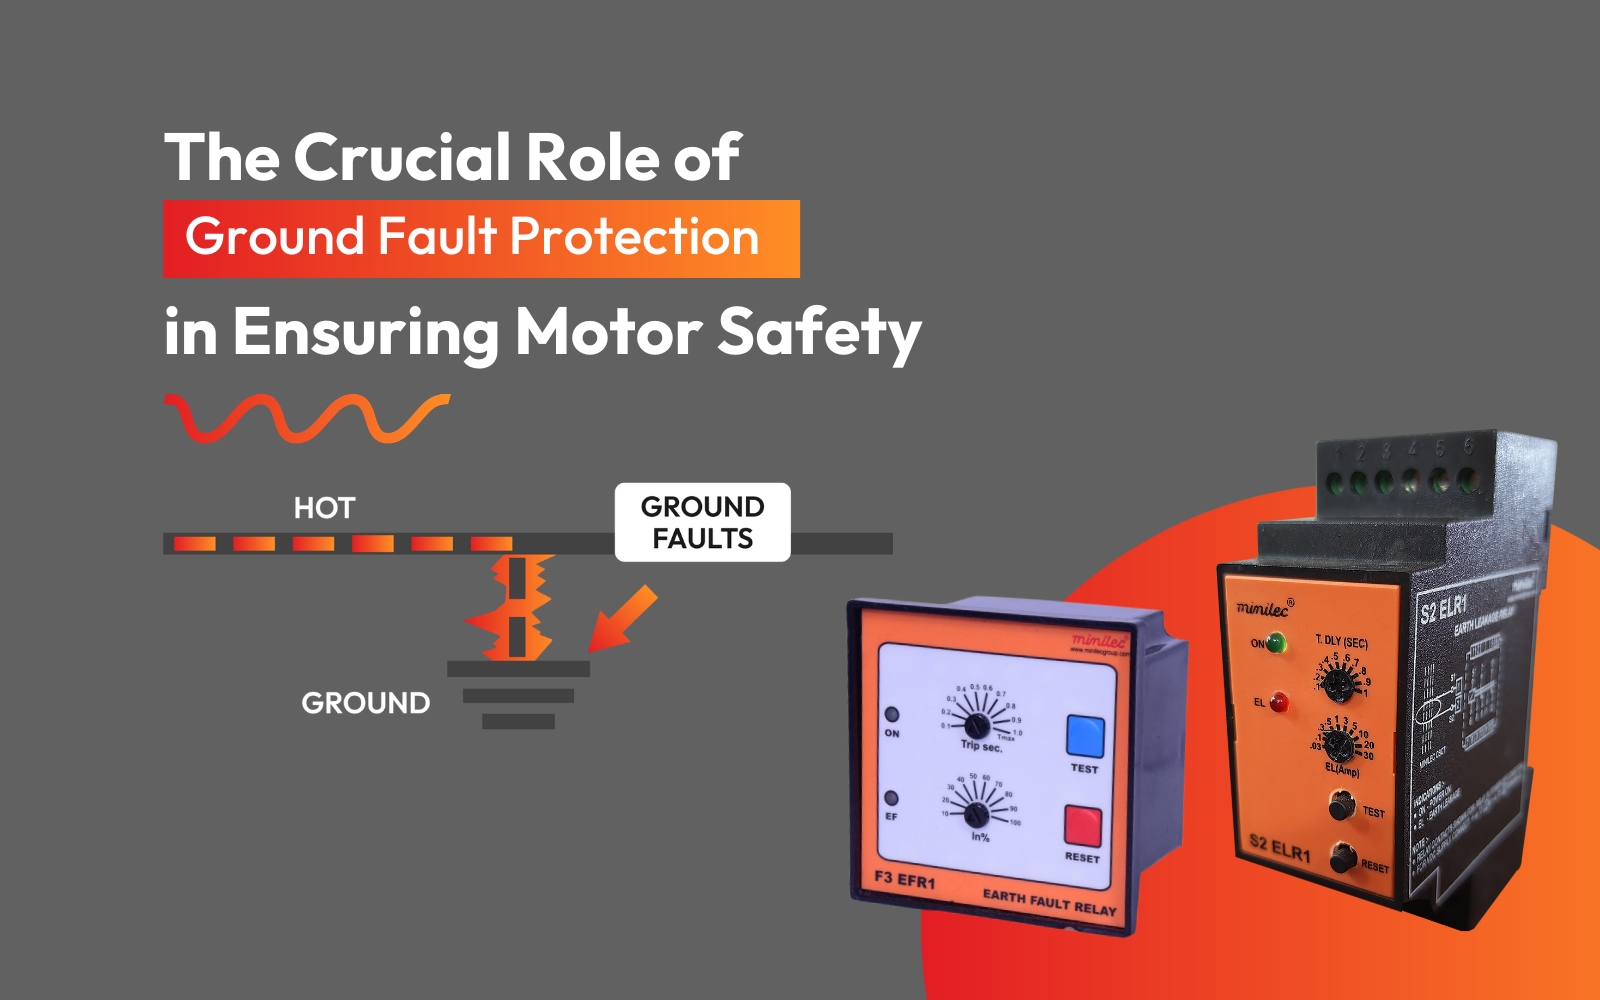 Ground Fault Protection